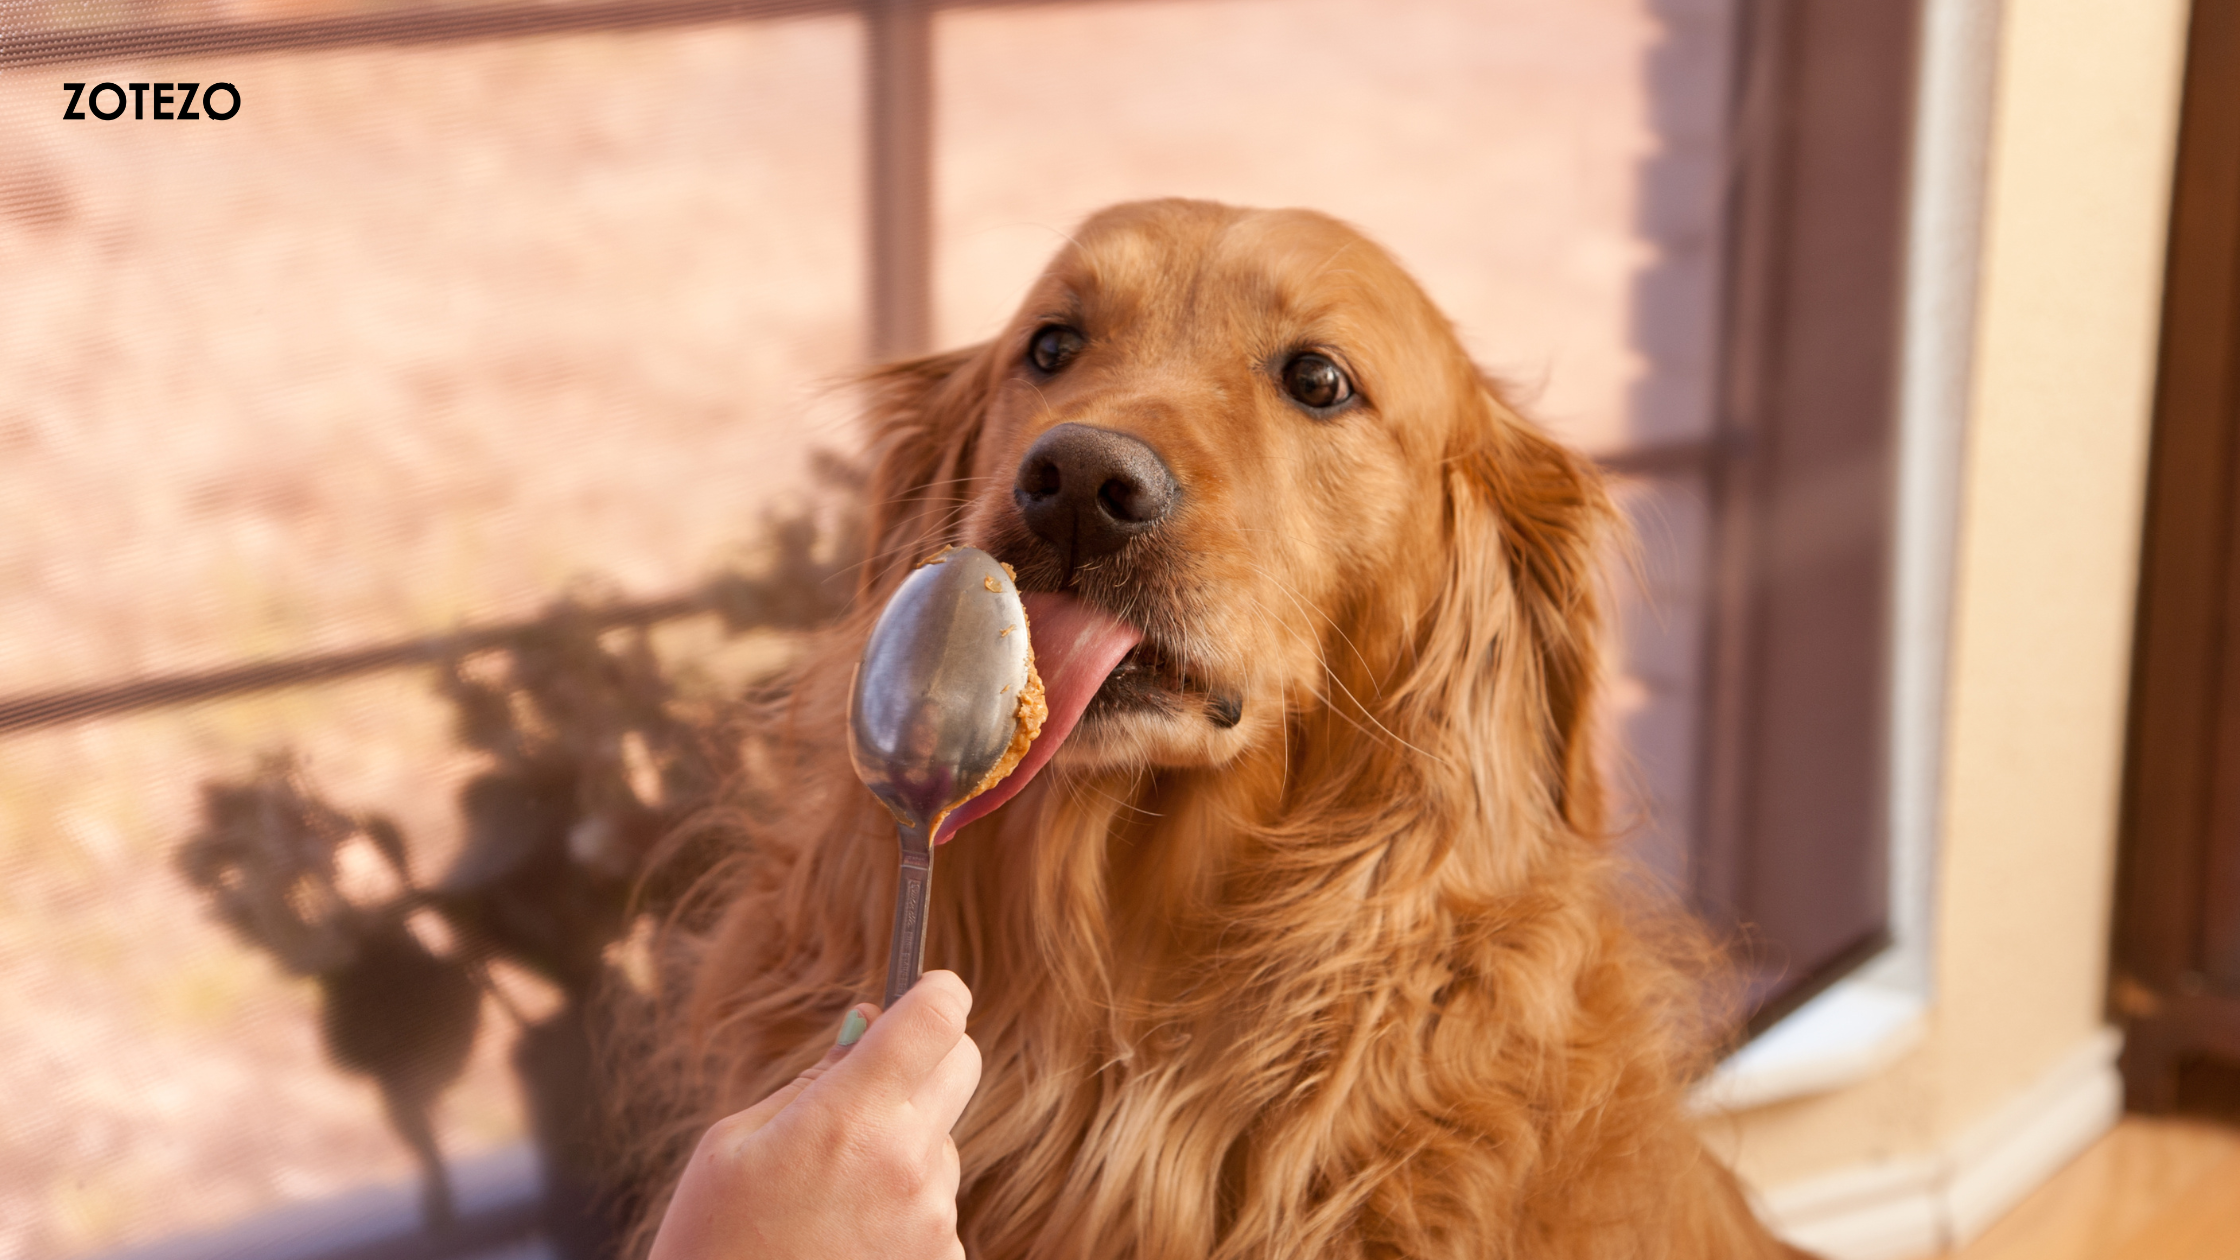 Peanut Butter For Dogs in UK